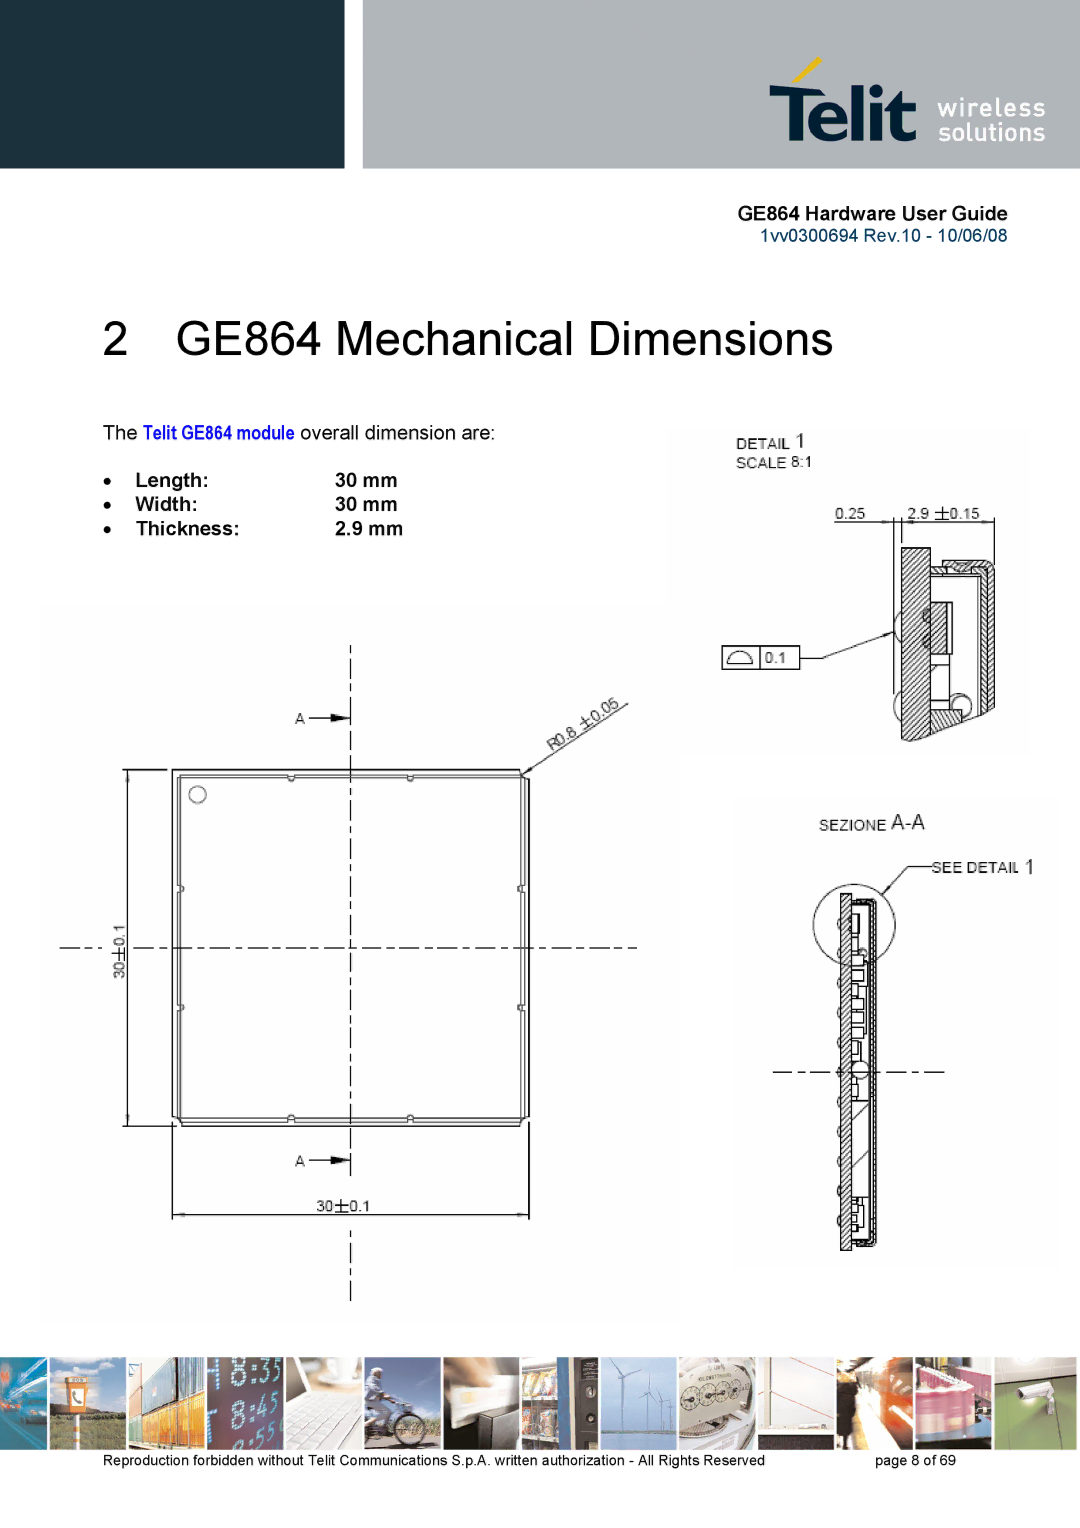 Telit Wireless Solutions manual GE864 Mechanical Dimensions, Length 30 mm Width Thickness 